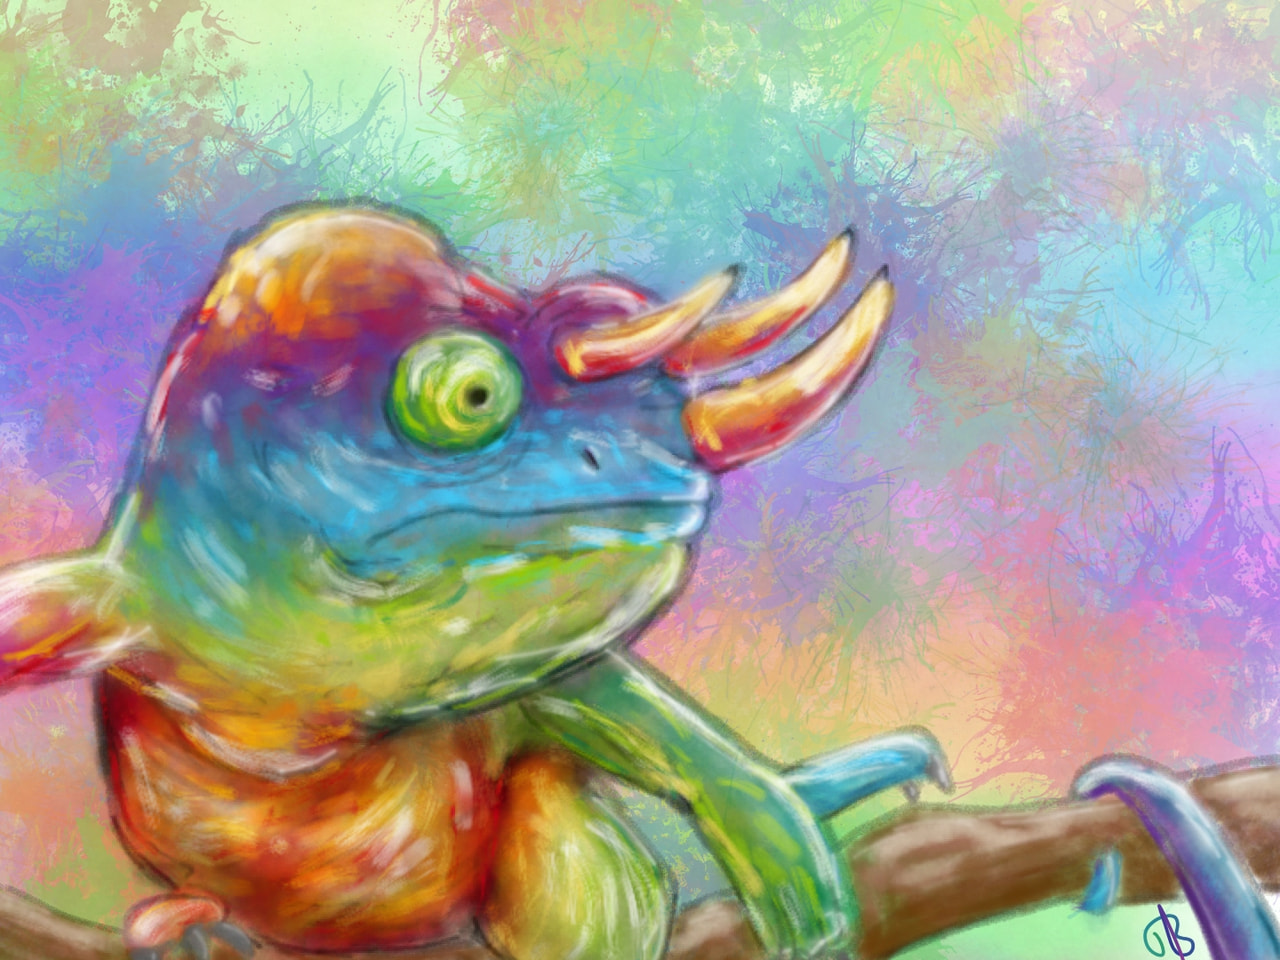 A quick colorful doodle! #fridayswithsketch #manycolors #chameleon #color #tree #doodle